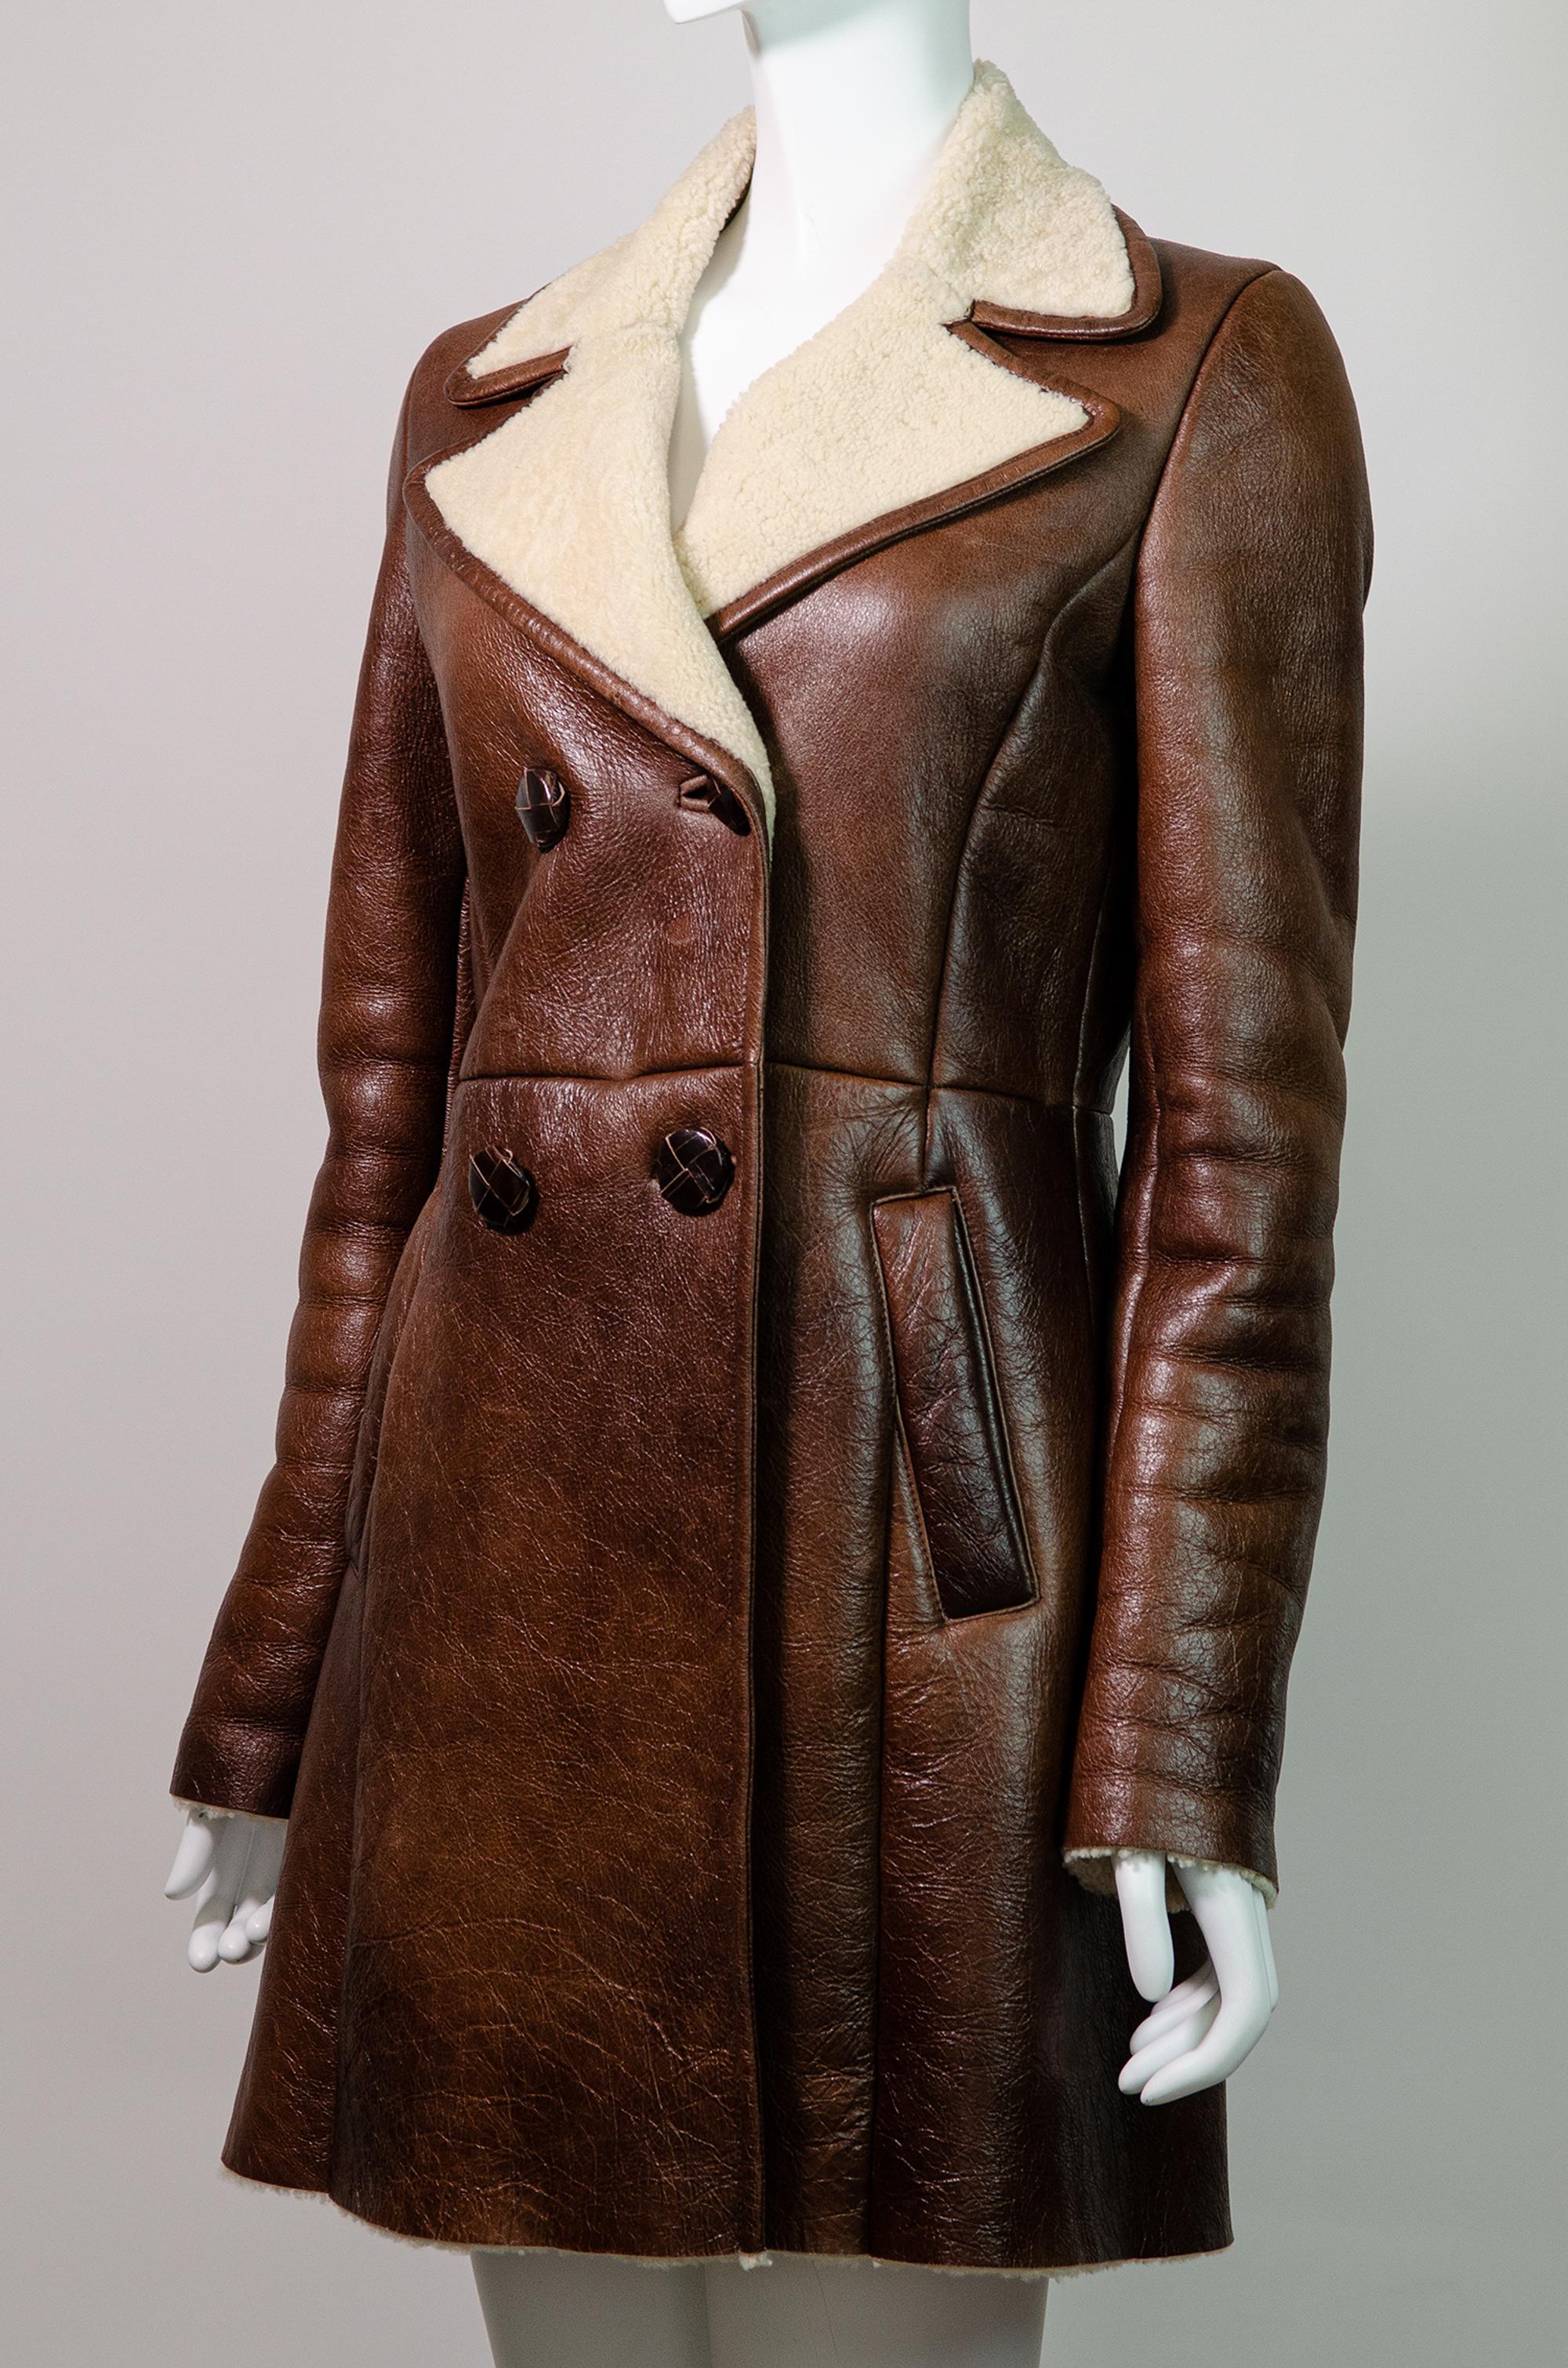 The most amazing Prada shearling double breasted coat from 2010.

This gorgeous Prada double breasted coat is fully lined in shearling - it will certainly keep you warm in the cooler months. Very 1970s in its design, this warm-toned brown coat